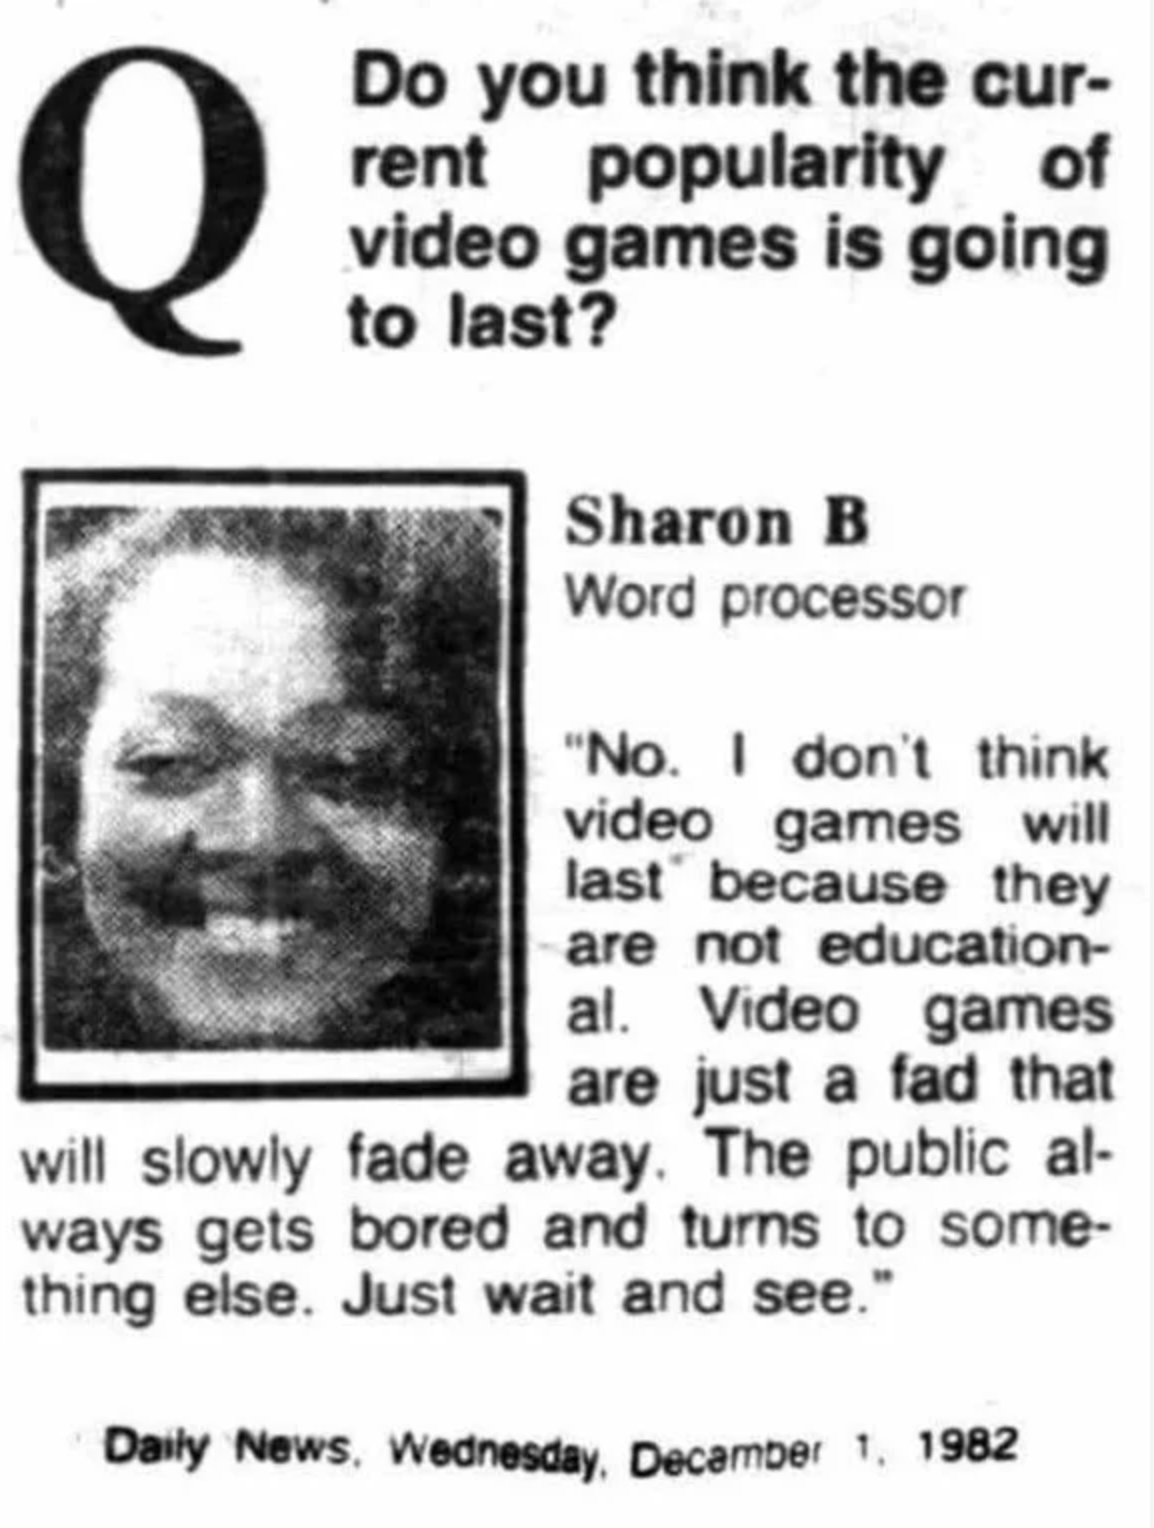 funny gaming memes - head - Q Do you think the cur rent popularity of video games is going to last? Sharon B Word processor "No. I don't think video games will last because they are not education al. Video games are just a fad that will slowly fade away. 